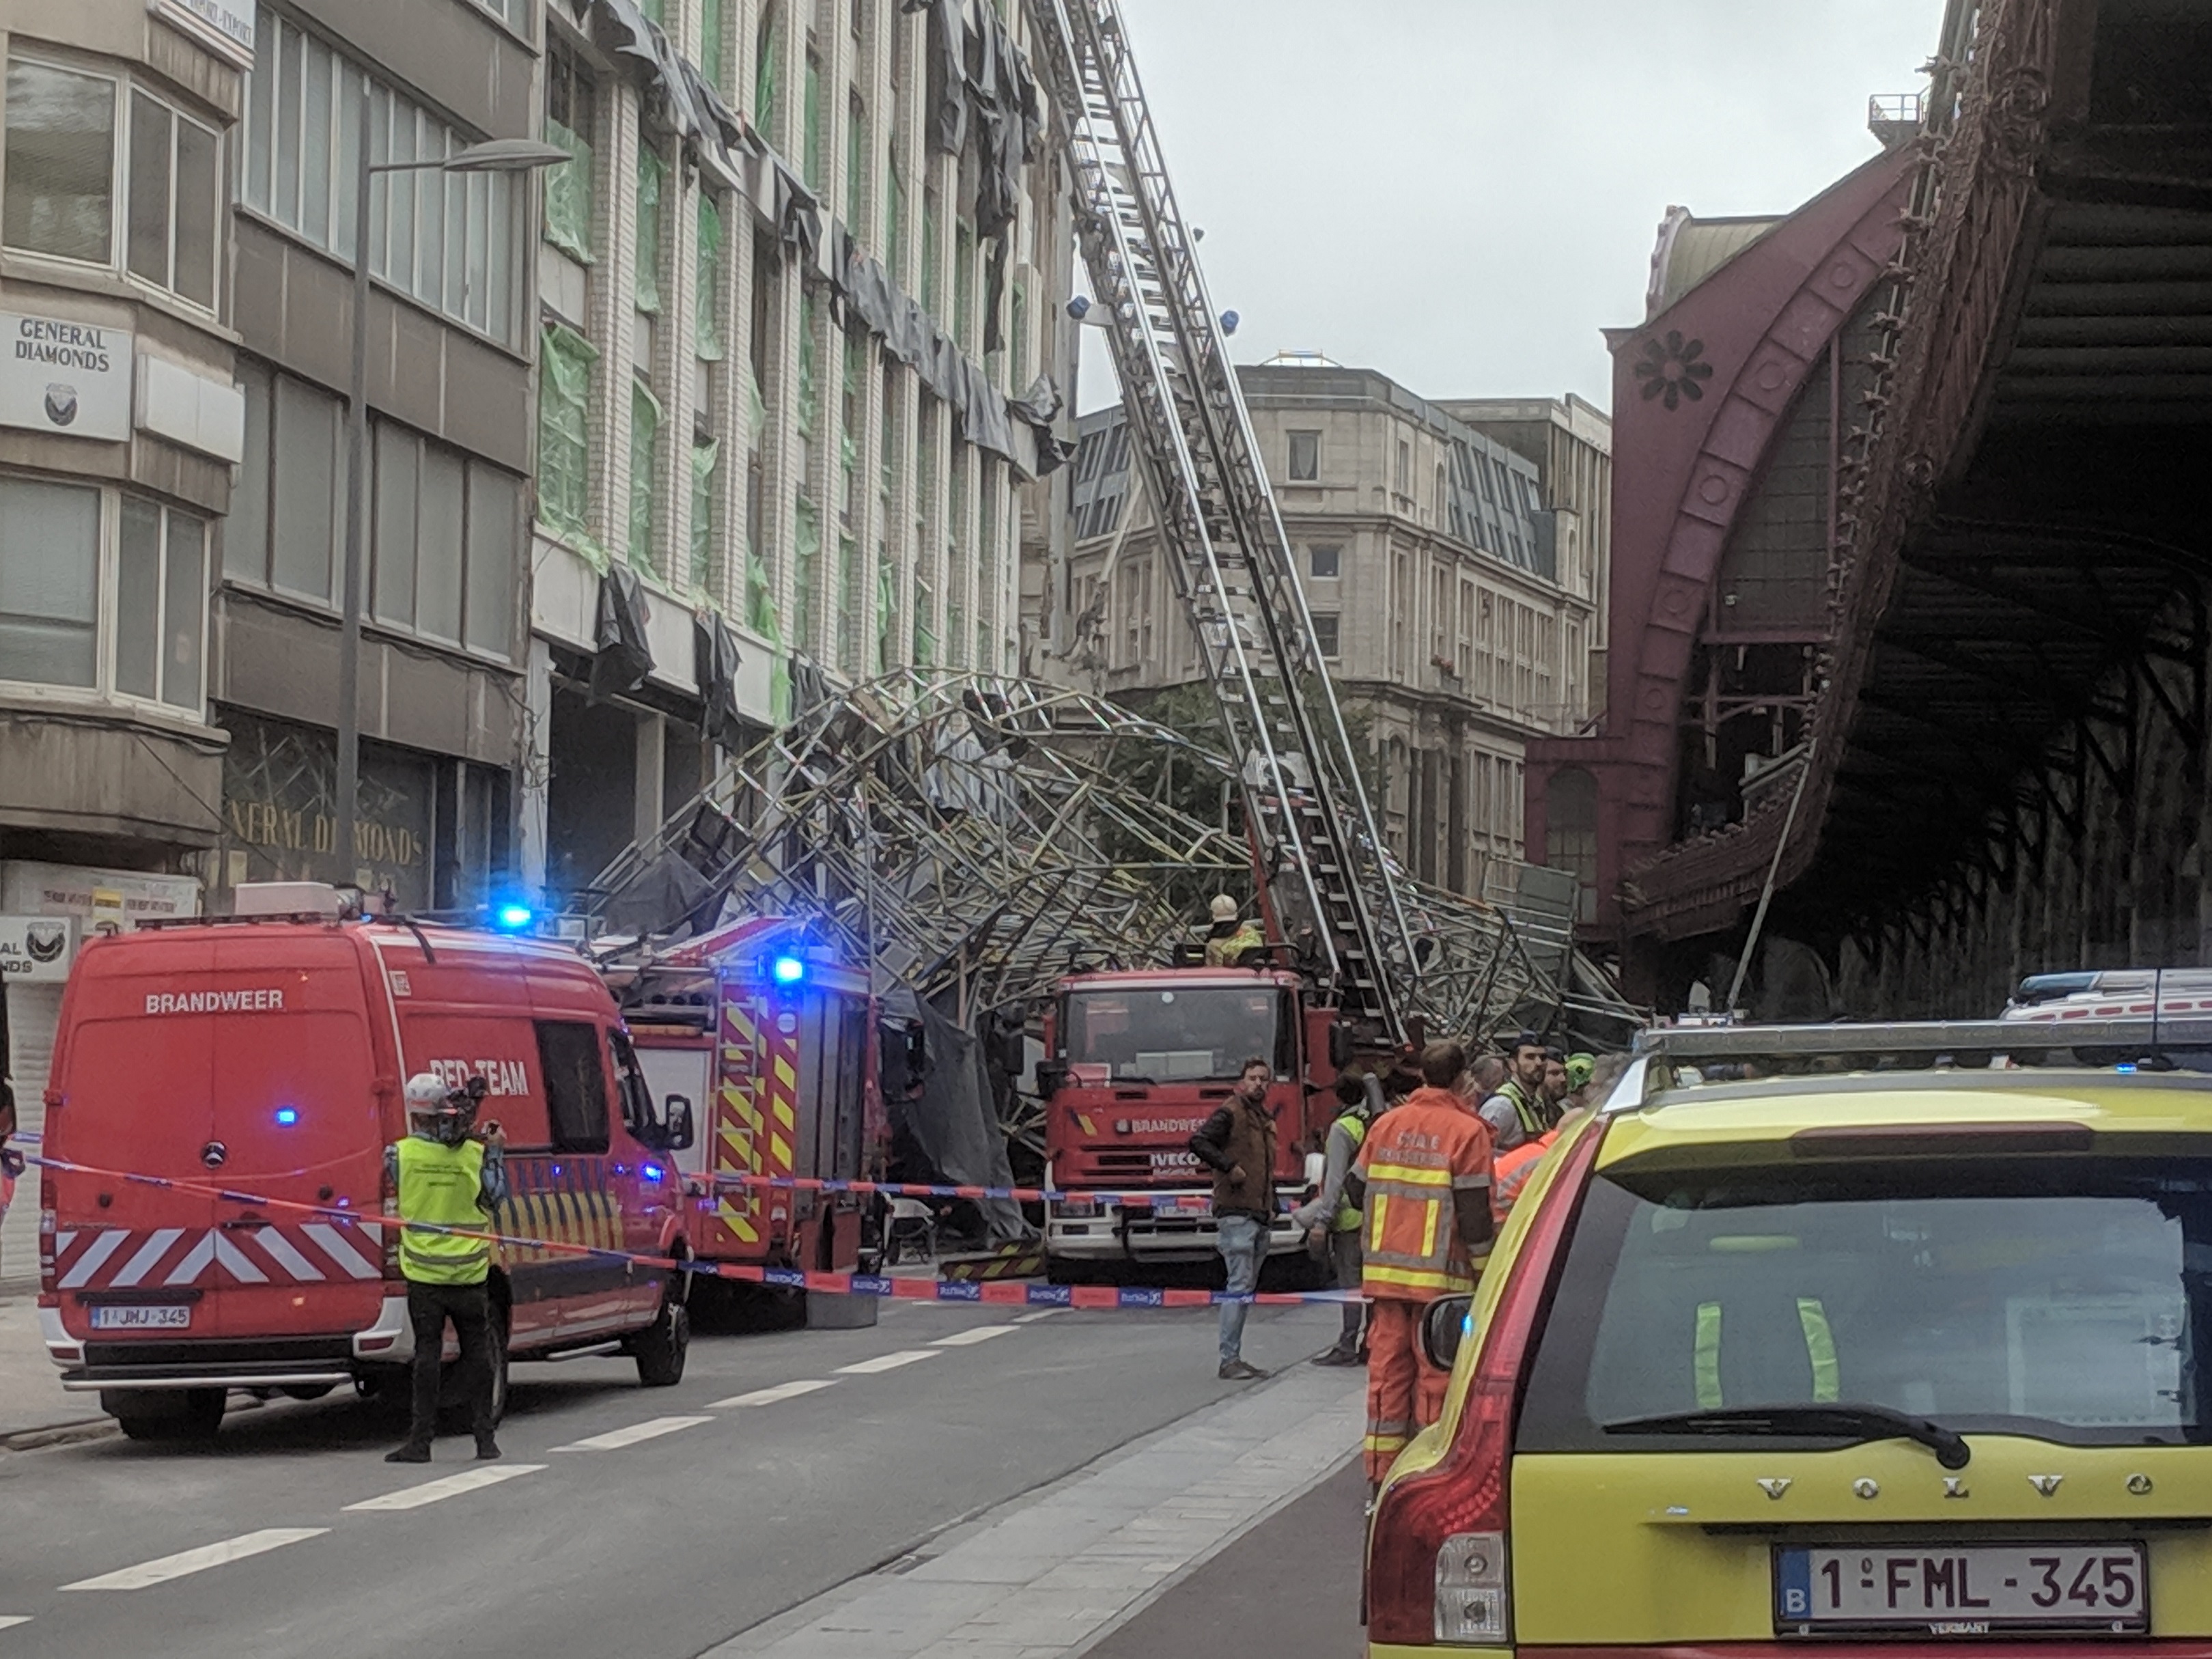 Scaffolding collapses in Antwerp, one dead | The Bulletin